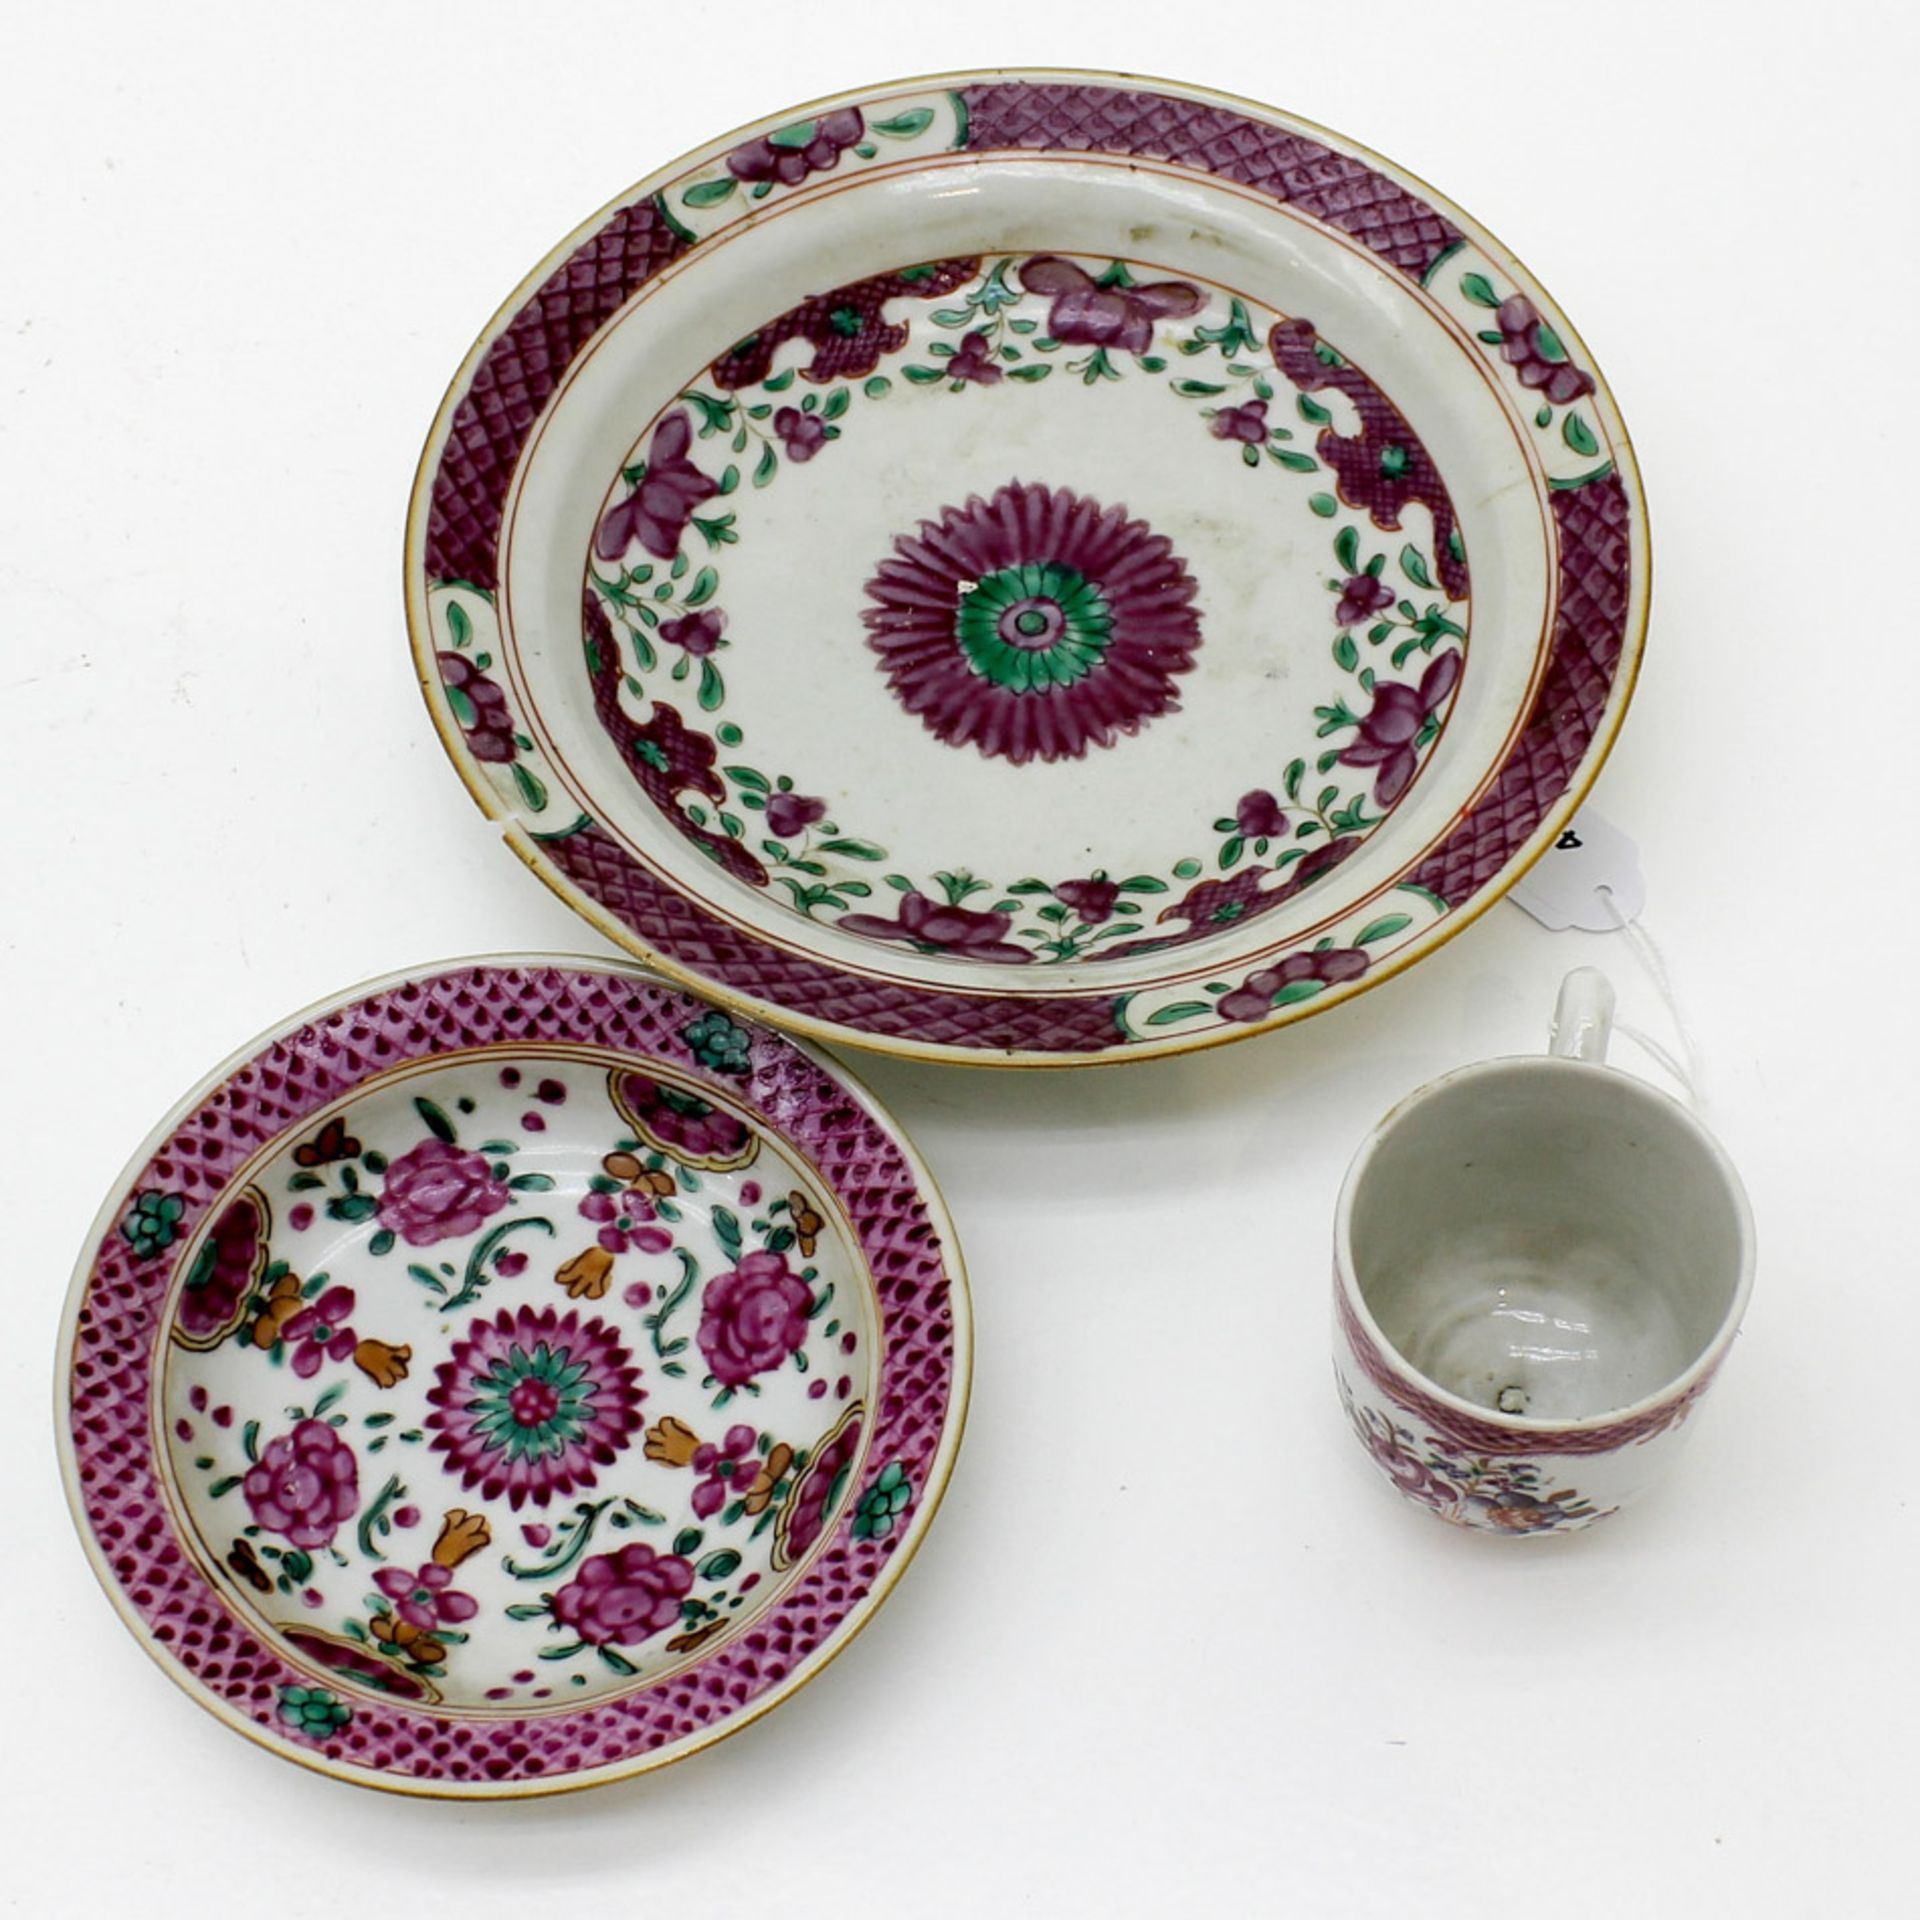 Lot of China Porcelain Consisting of cup, saucer and plate in family Rose decor, plate has